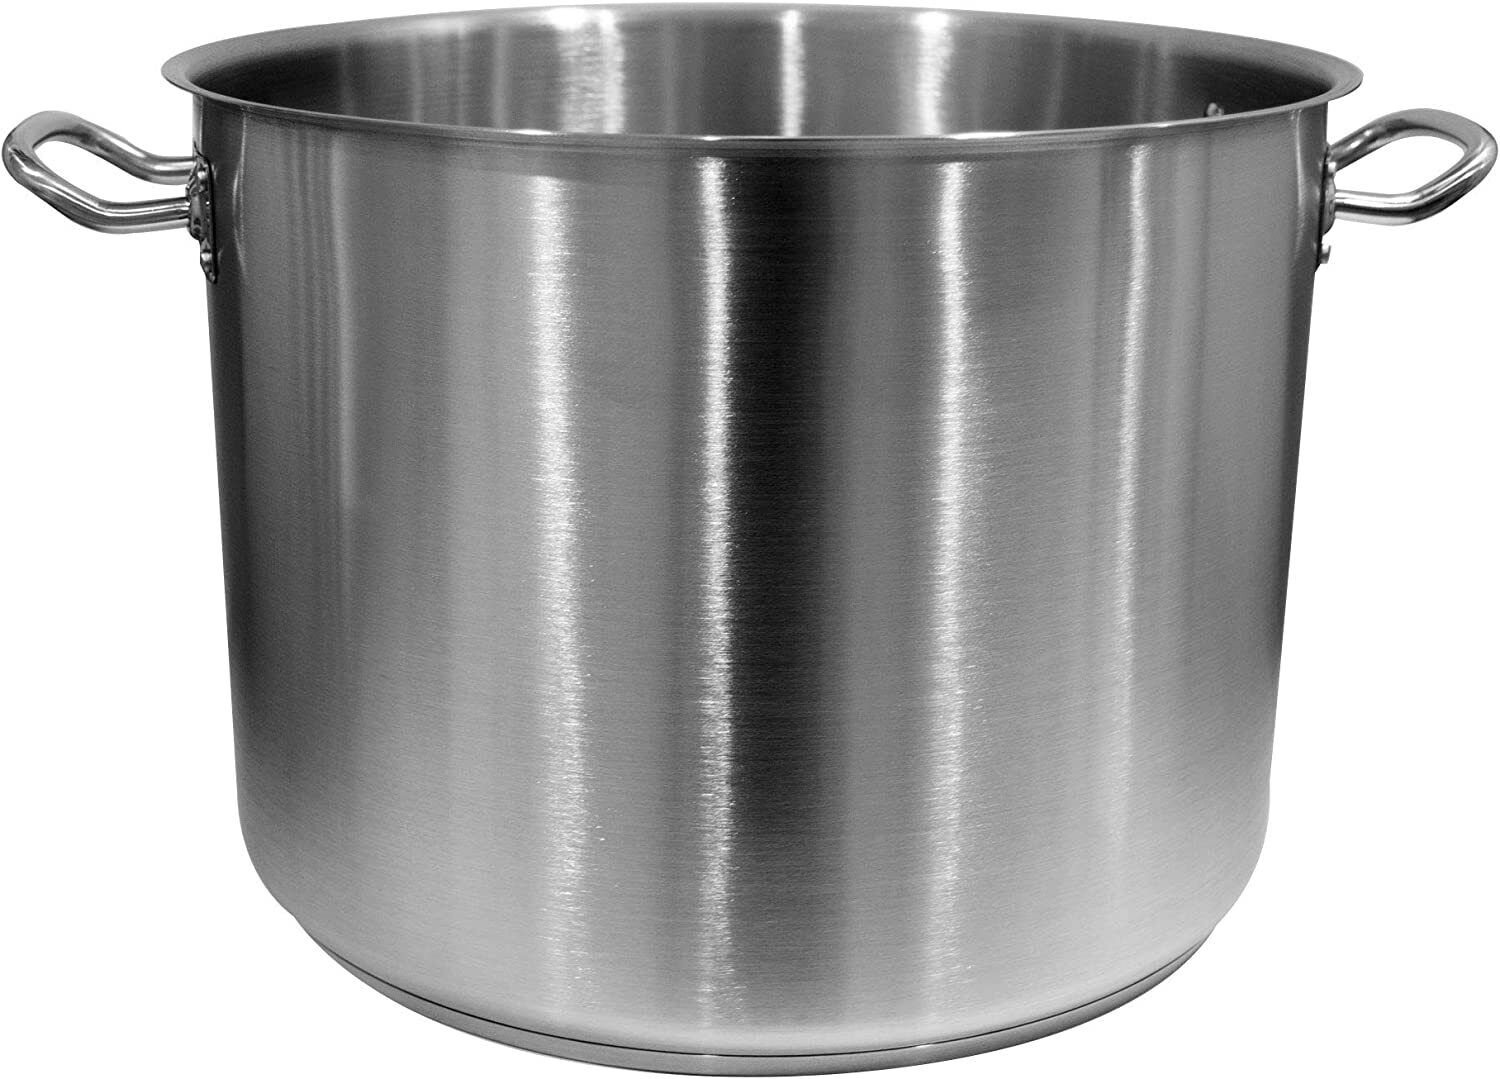 Update Stock Pot 40 Quart Stainless Steel Induction Ready Heavy Duty  SPS-40